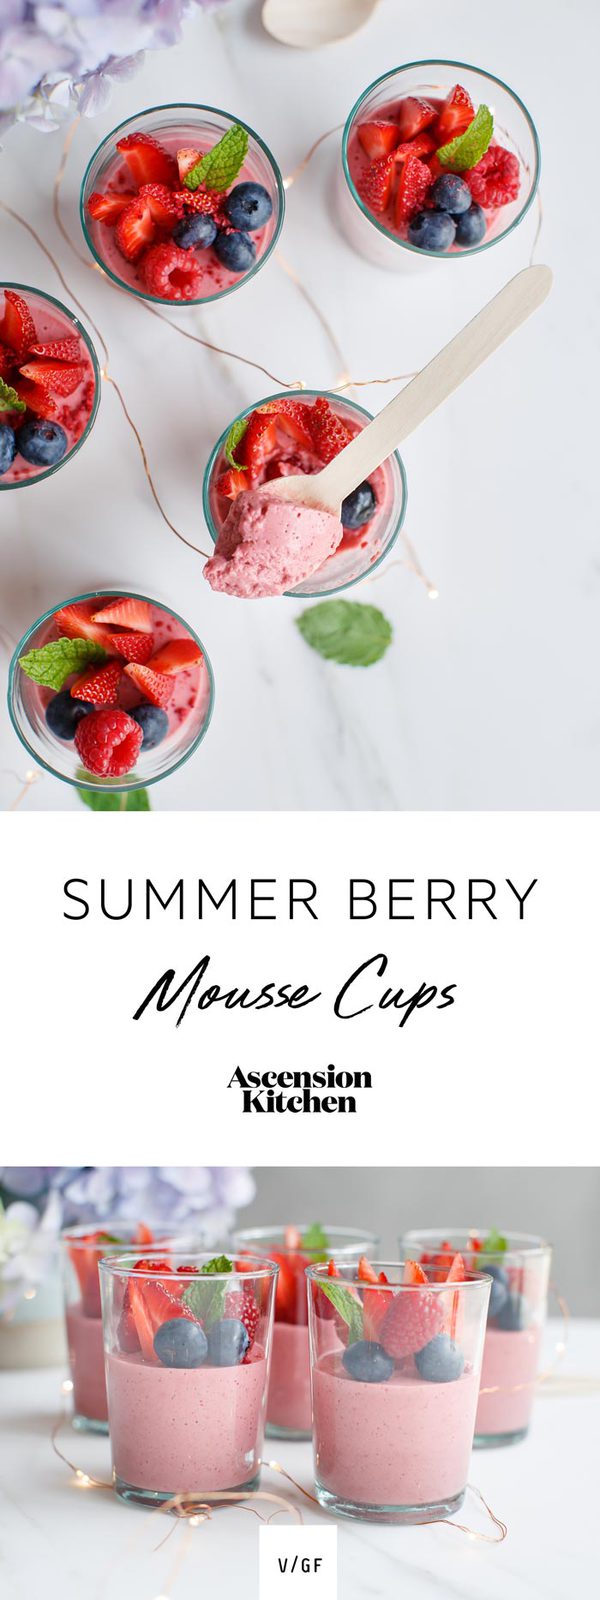 Summer Berry Mousse Cups - dairy free, nut free, gluten free